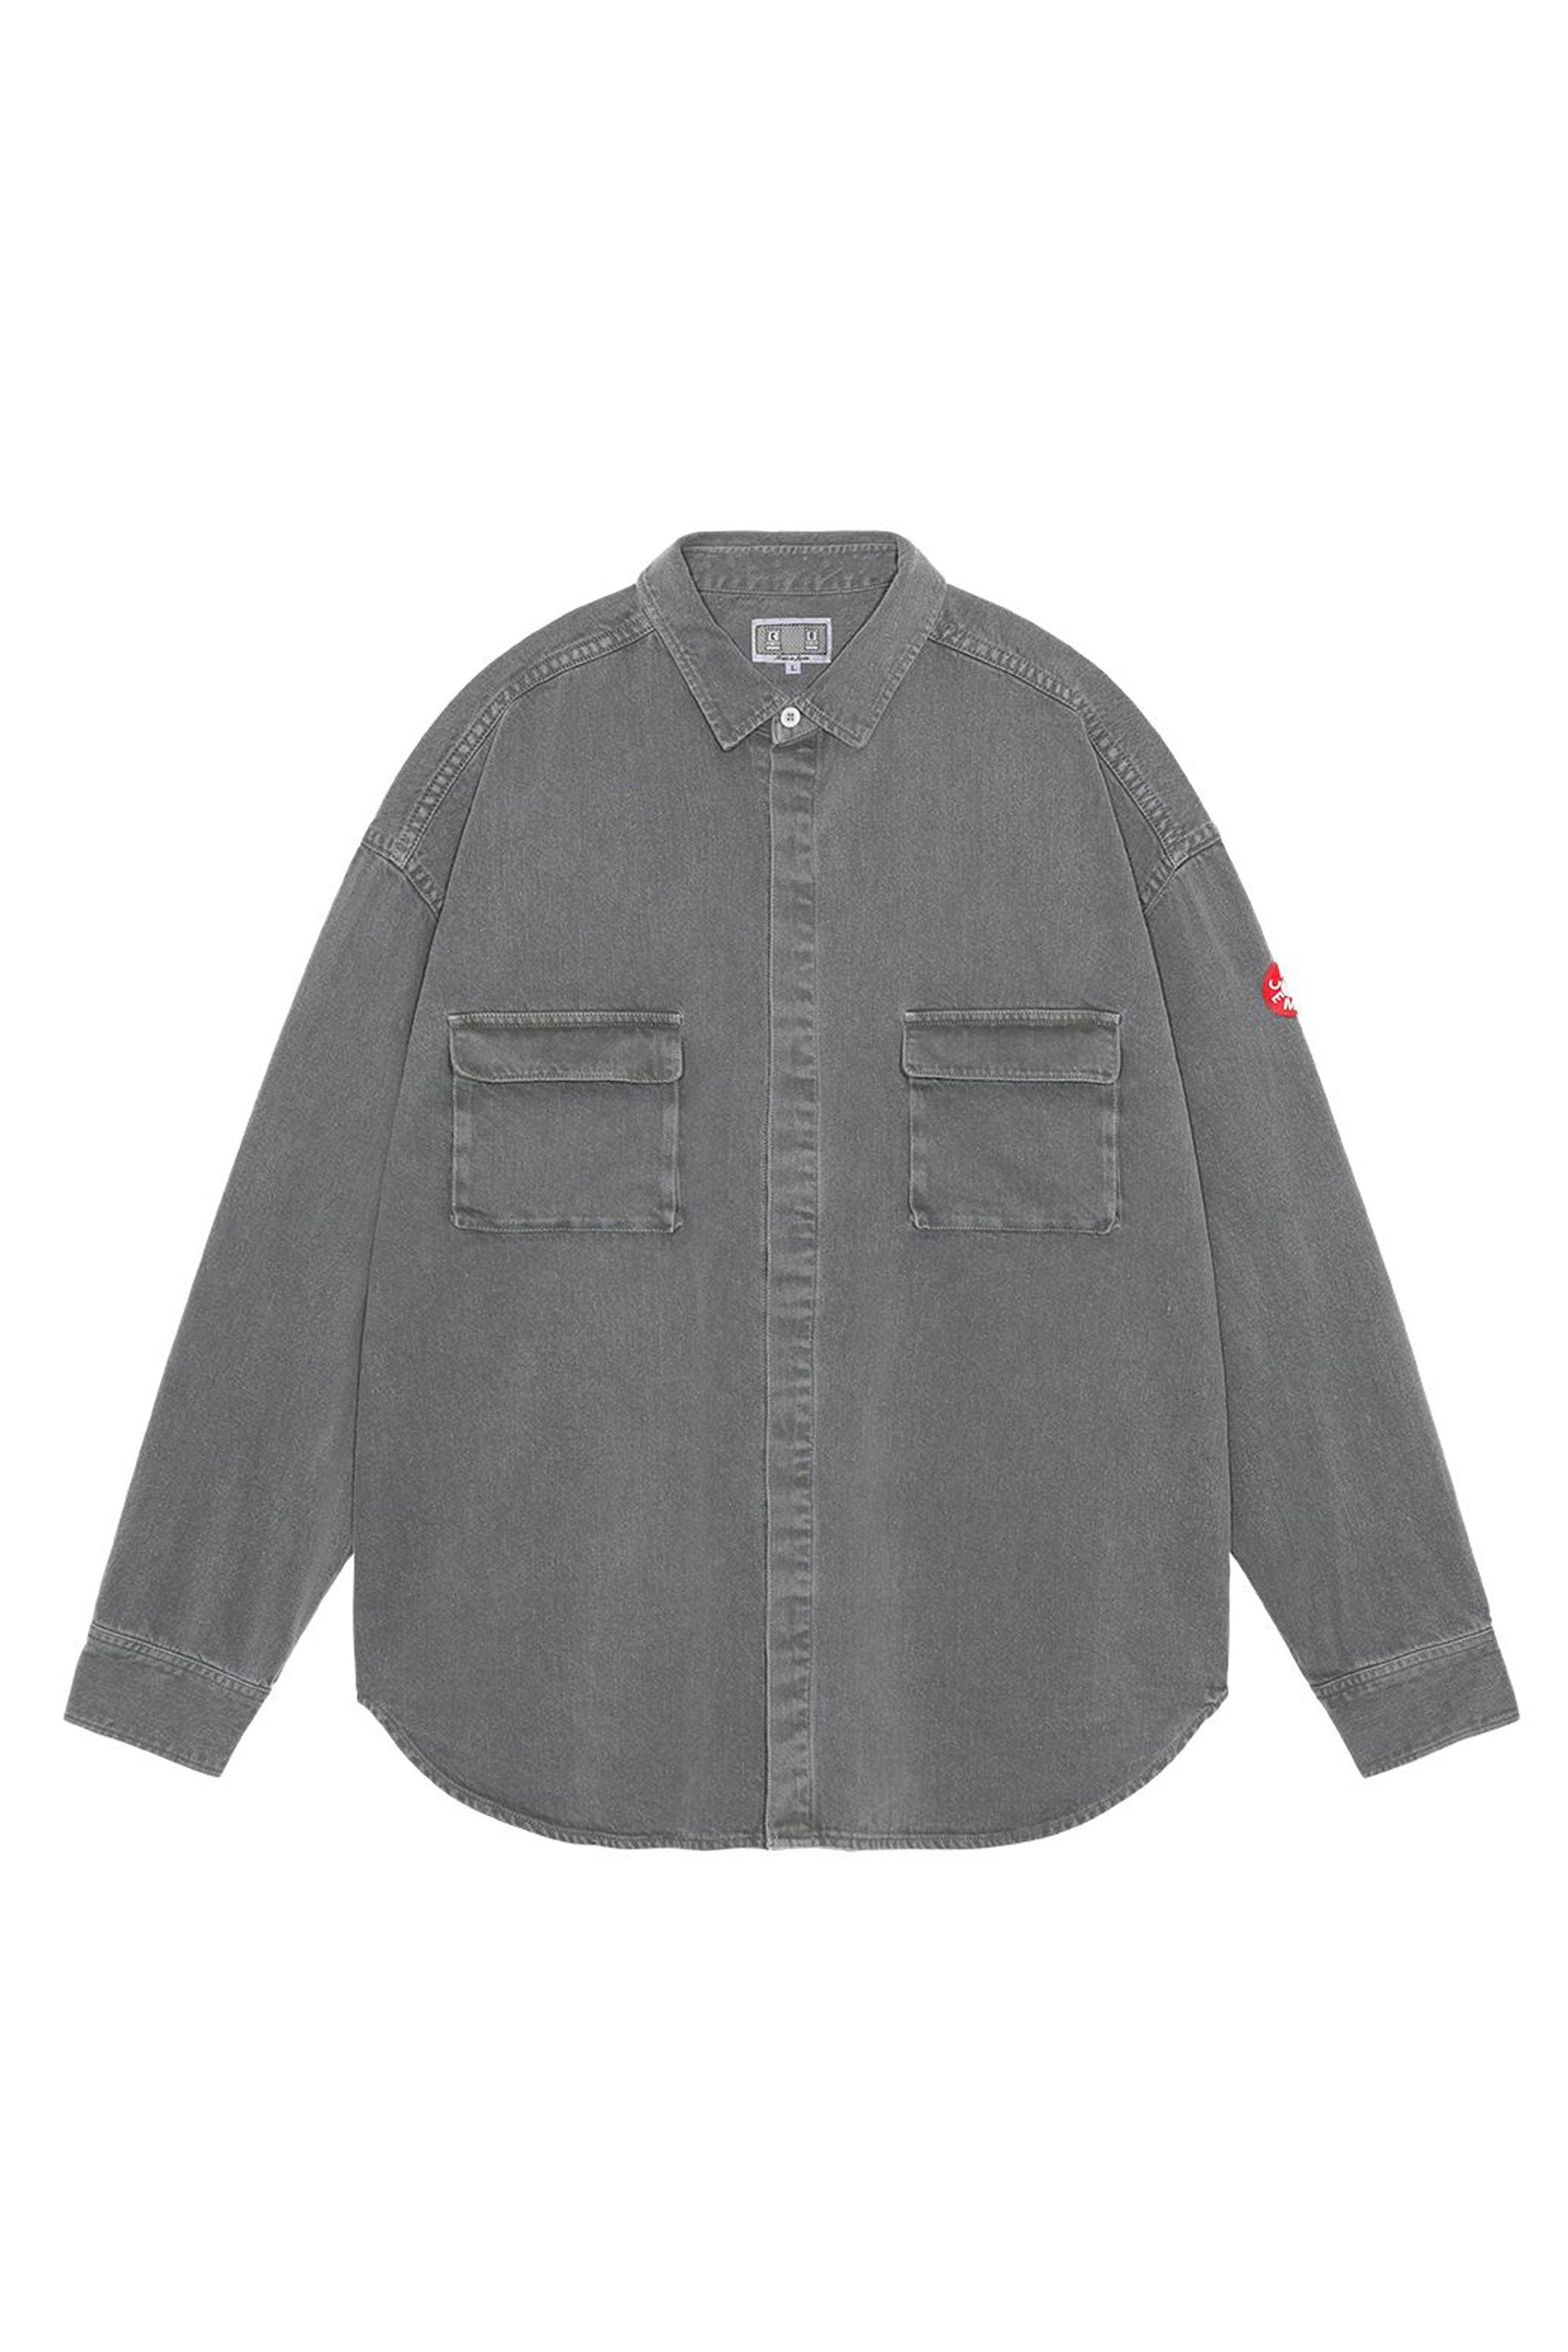 The CAV EMPT - OVERDYE COLOUR DENIM BIG SHIRT GREEN available online with global shipping, and in PAM Stores Melbourne and Sydney.